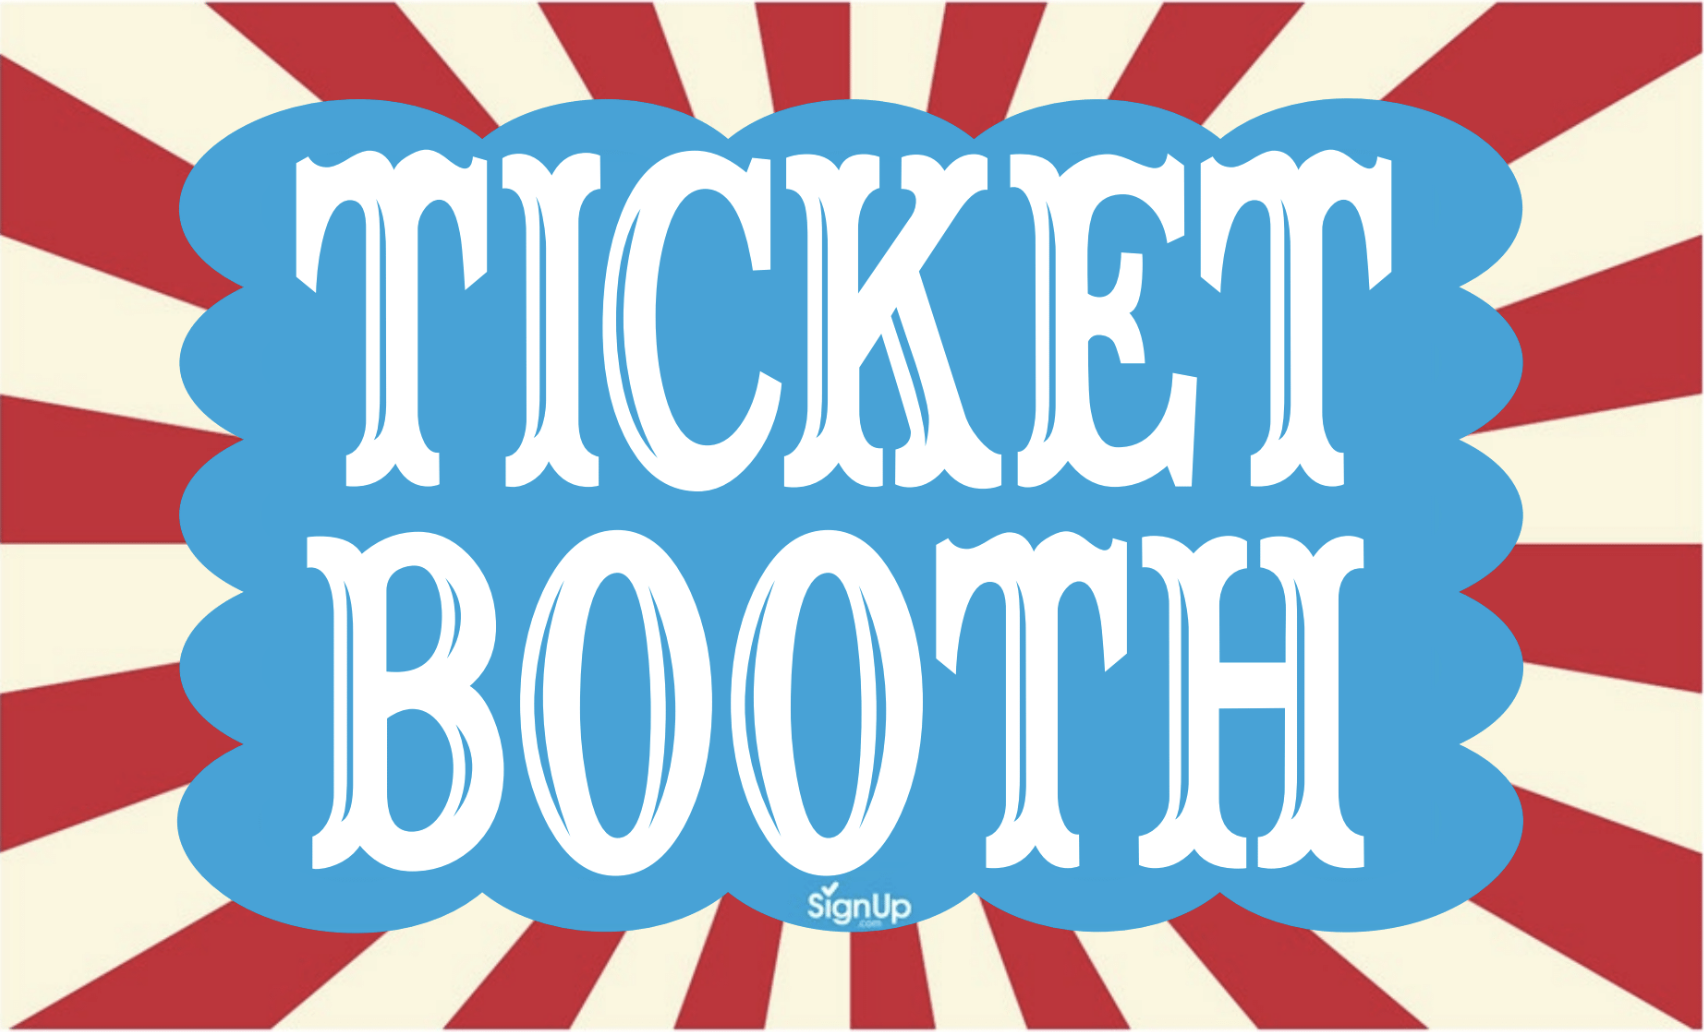 Printable Carnival Signs Free Festive Signage For Games Tickets Booths Food Stations SignUp - Free Printable Carnival Signs